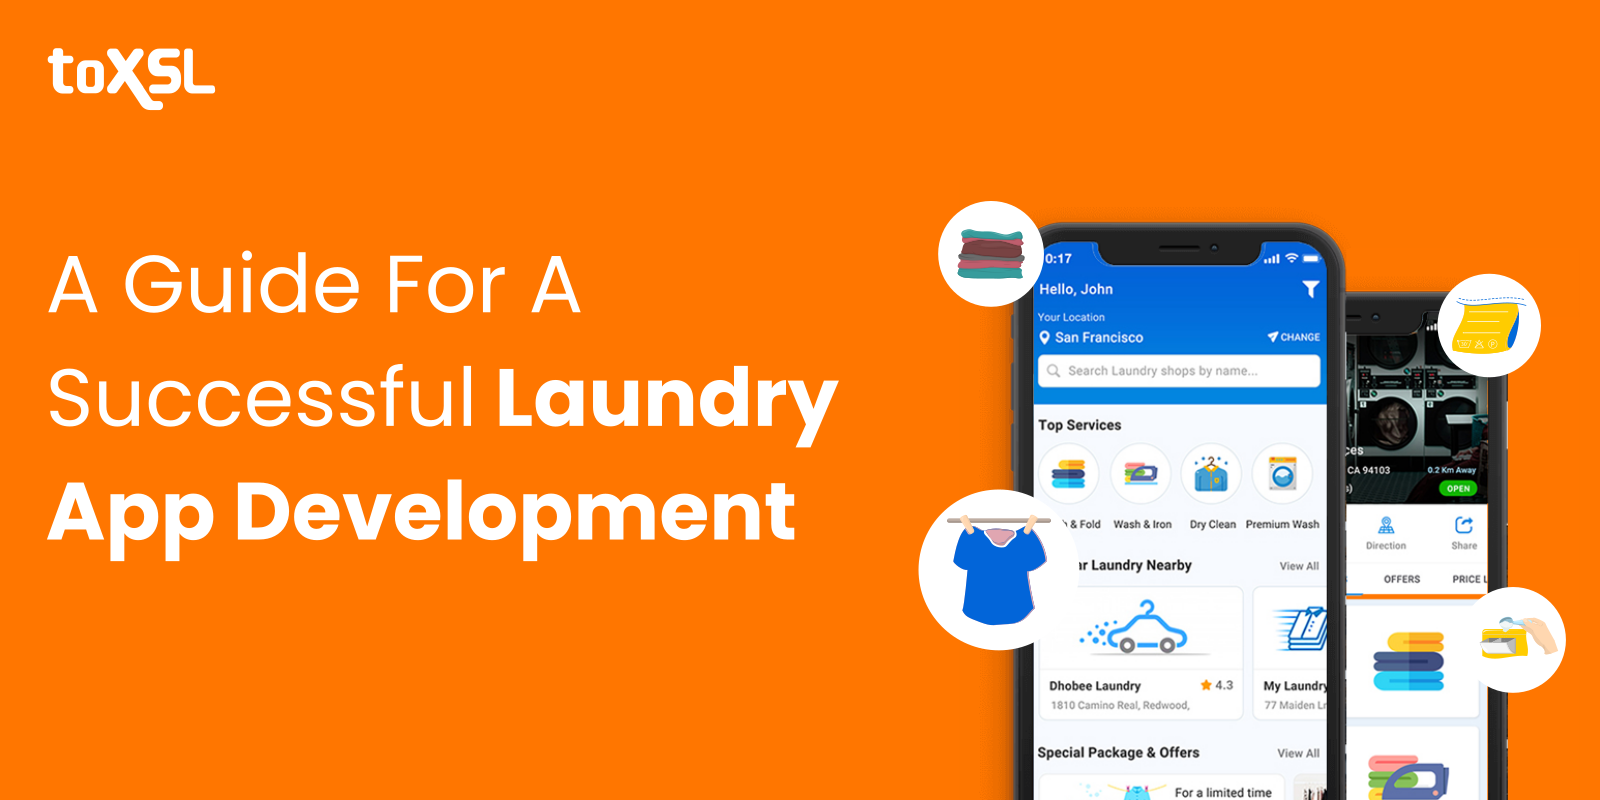 A Step-by-step Guide For A Successful Laundry App Development